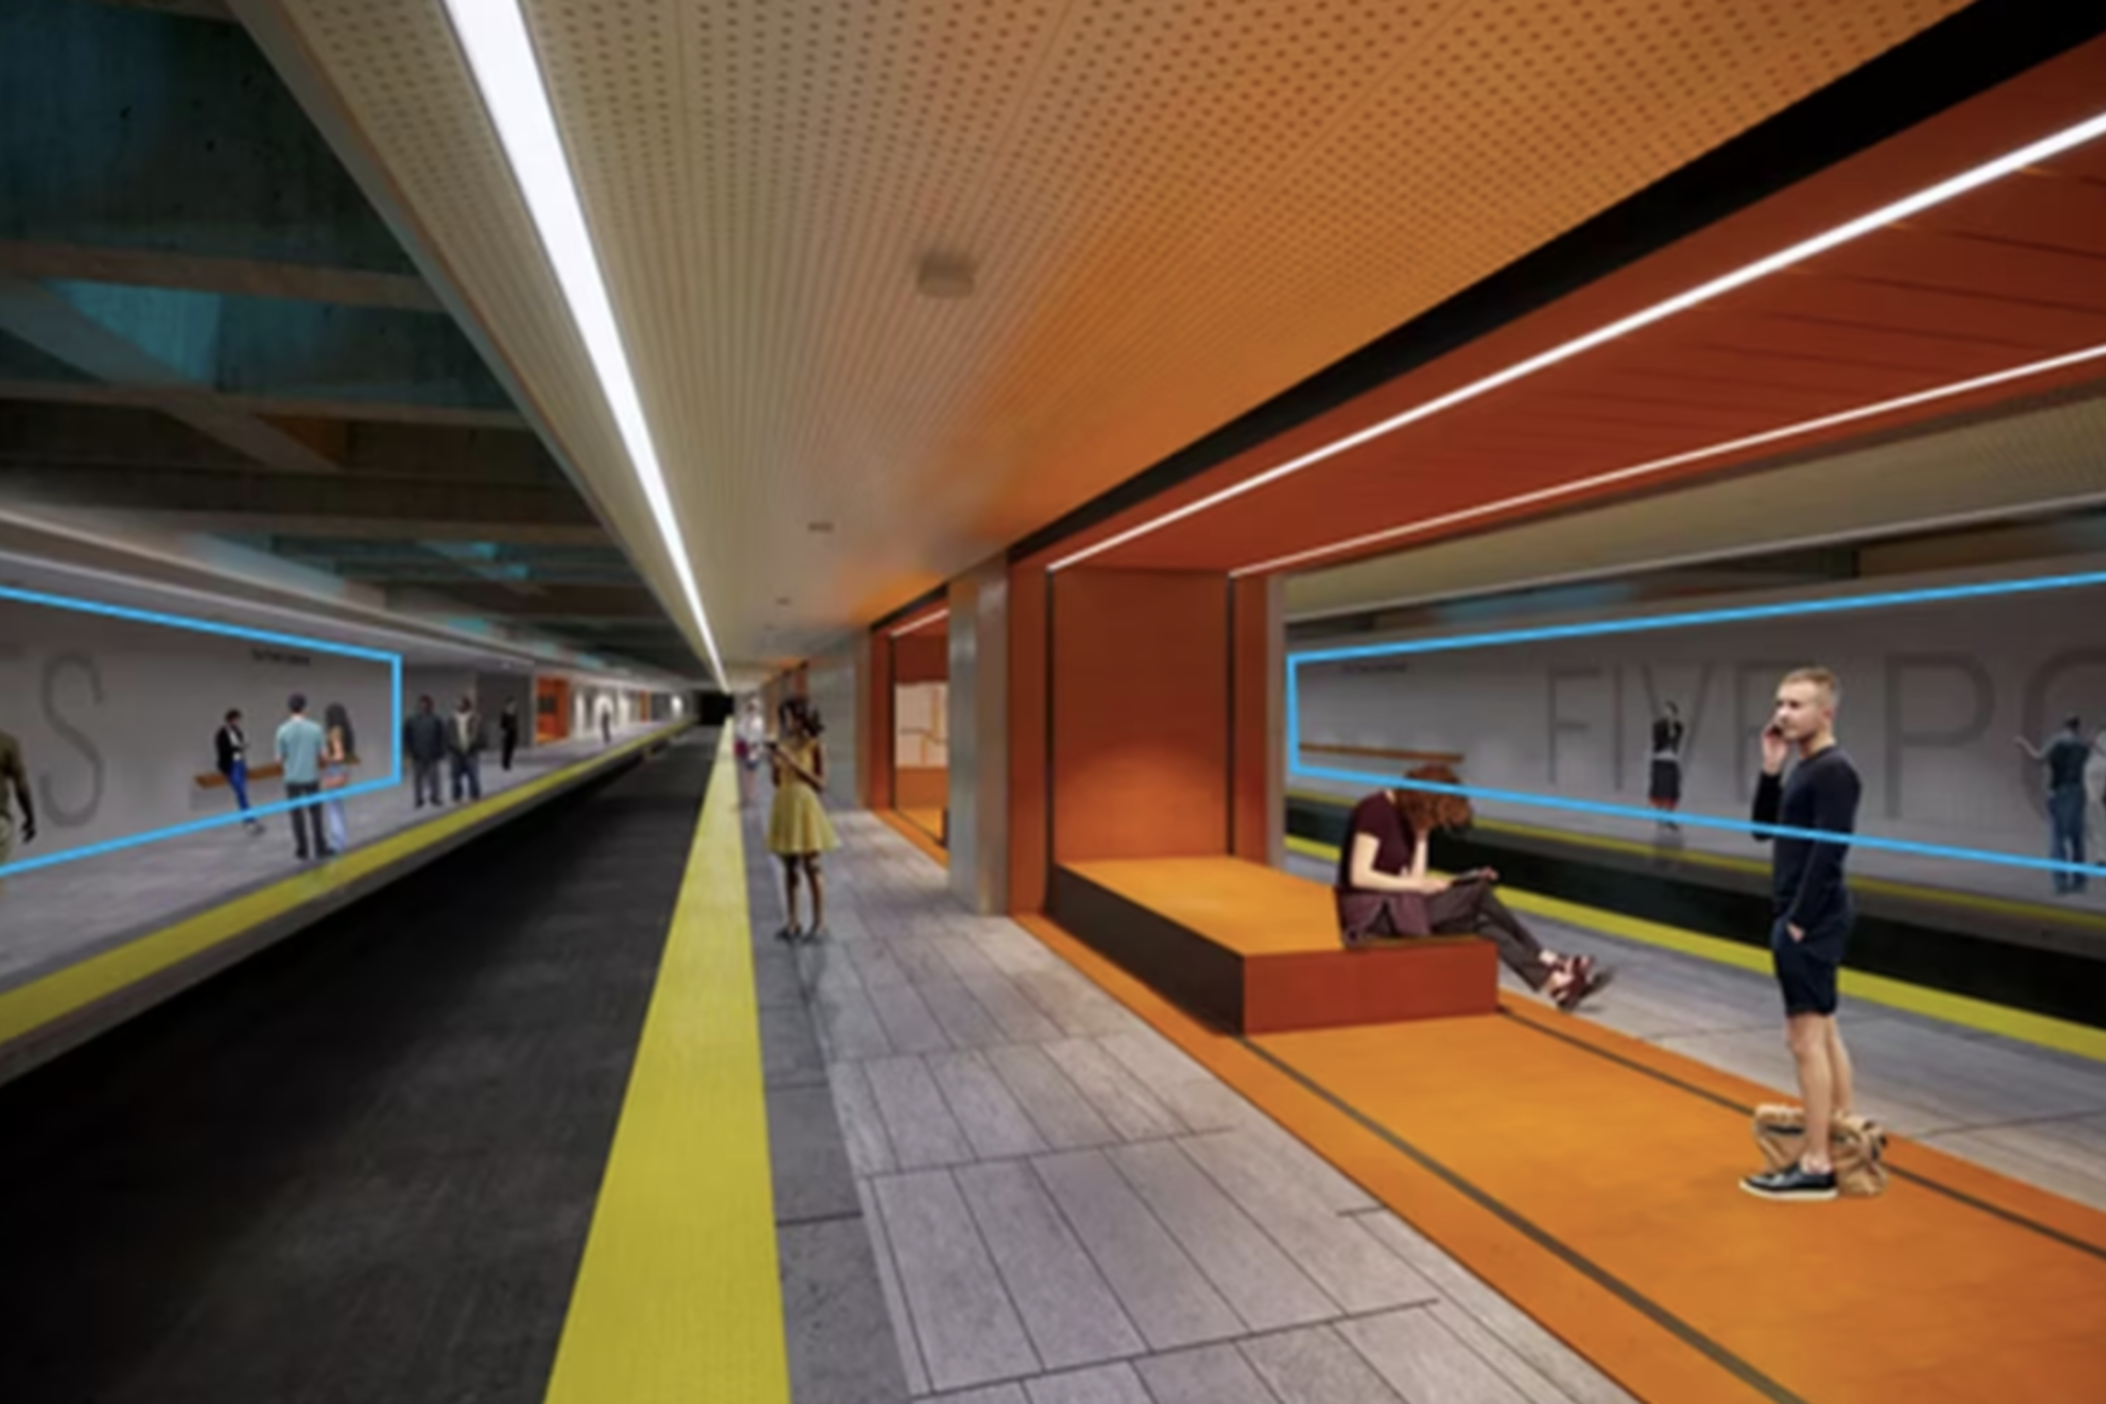 A rendering of a potential mosaic at MARTA's Five Points Station in downtown Atlanta